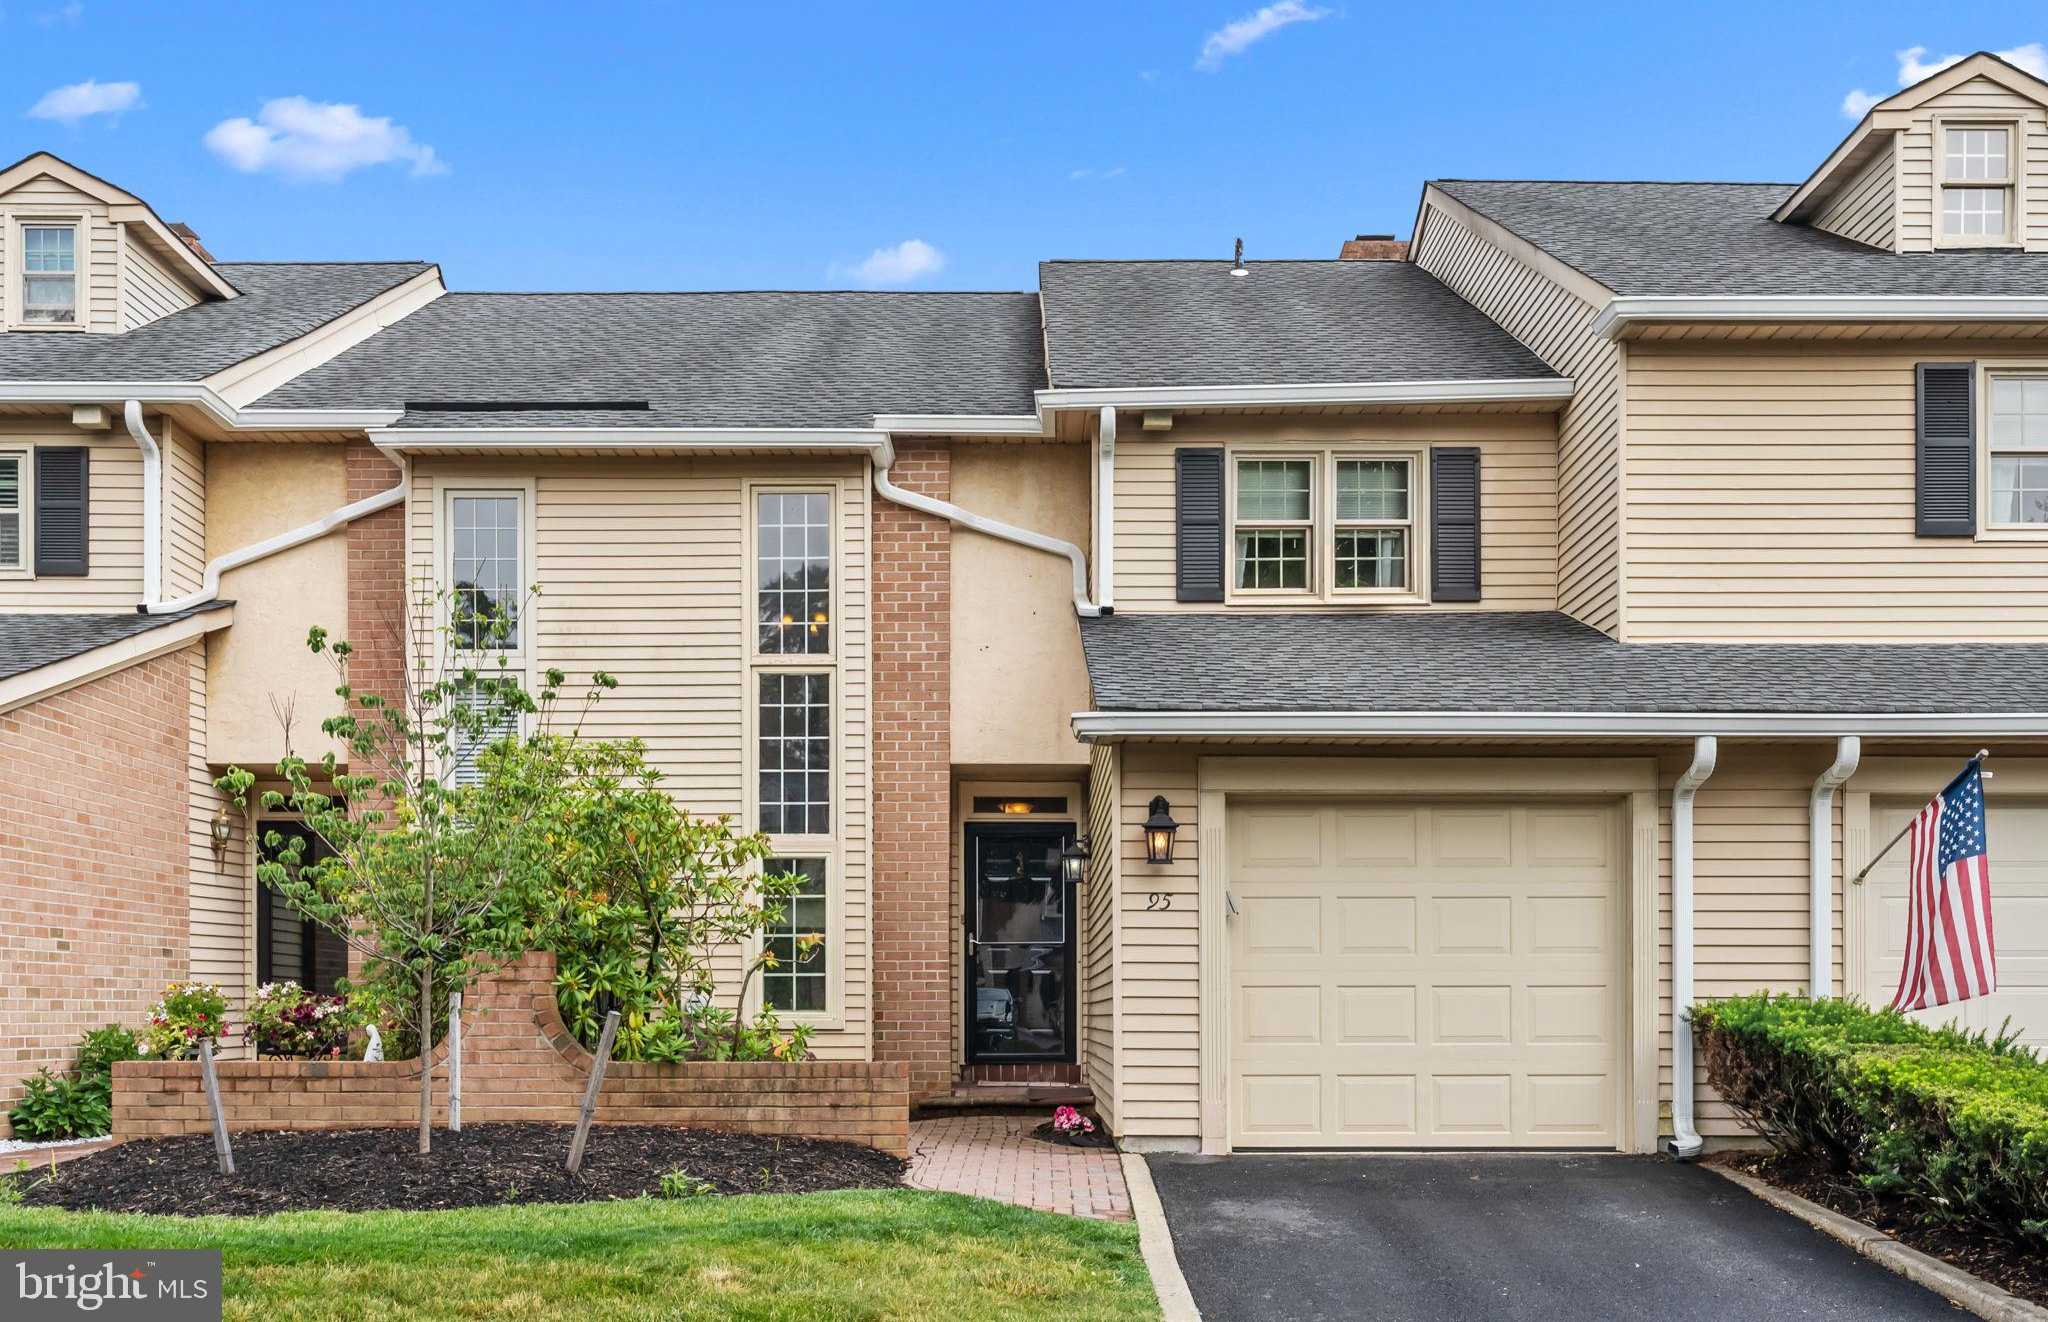 View YARDLEY, PA 19067 townhome